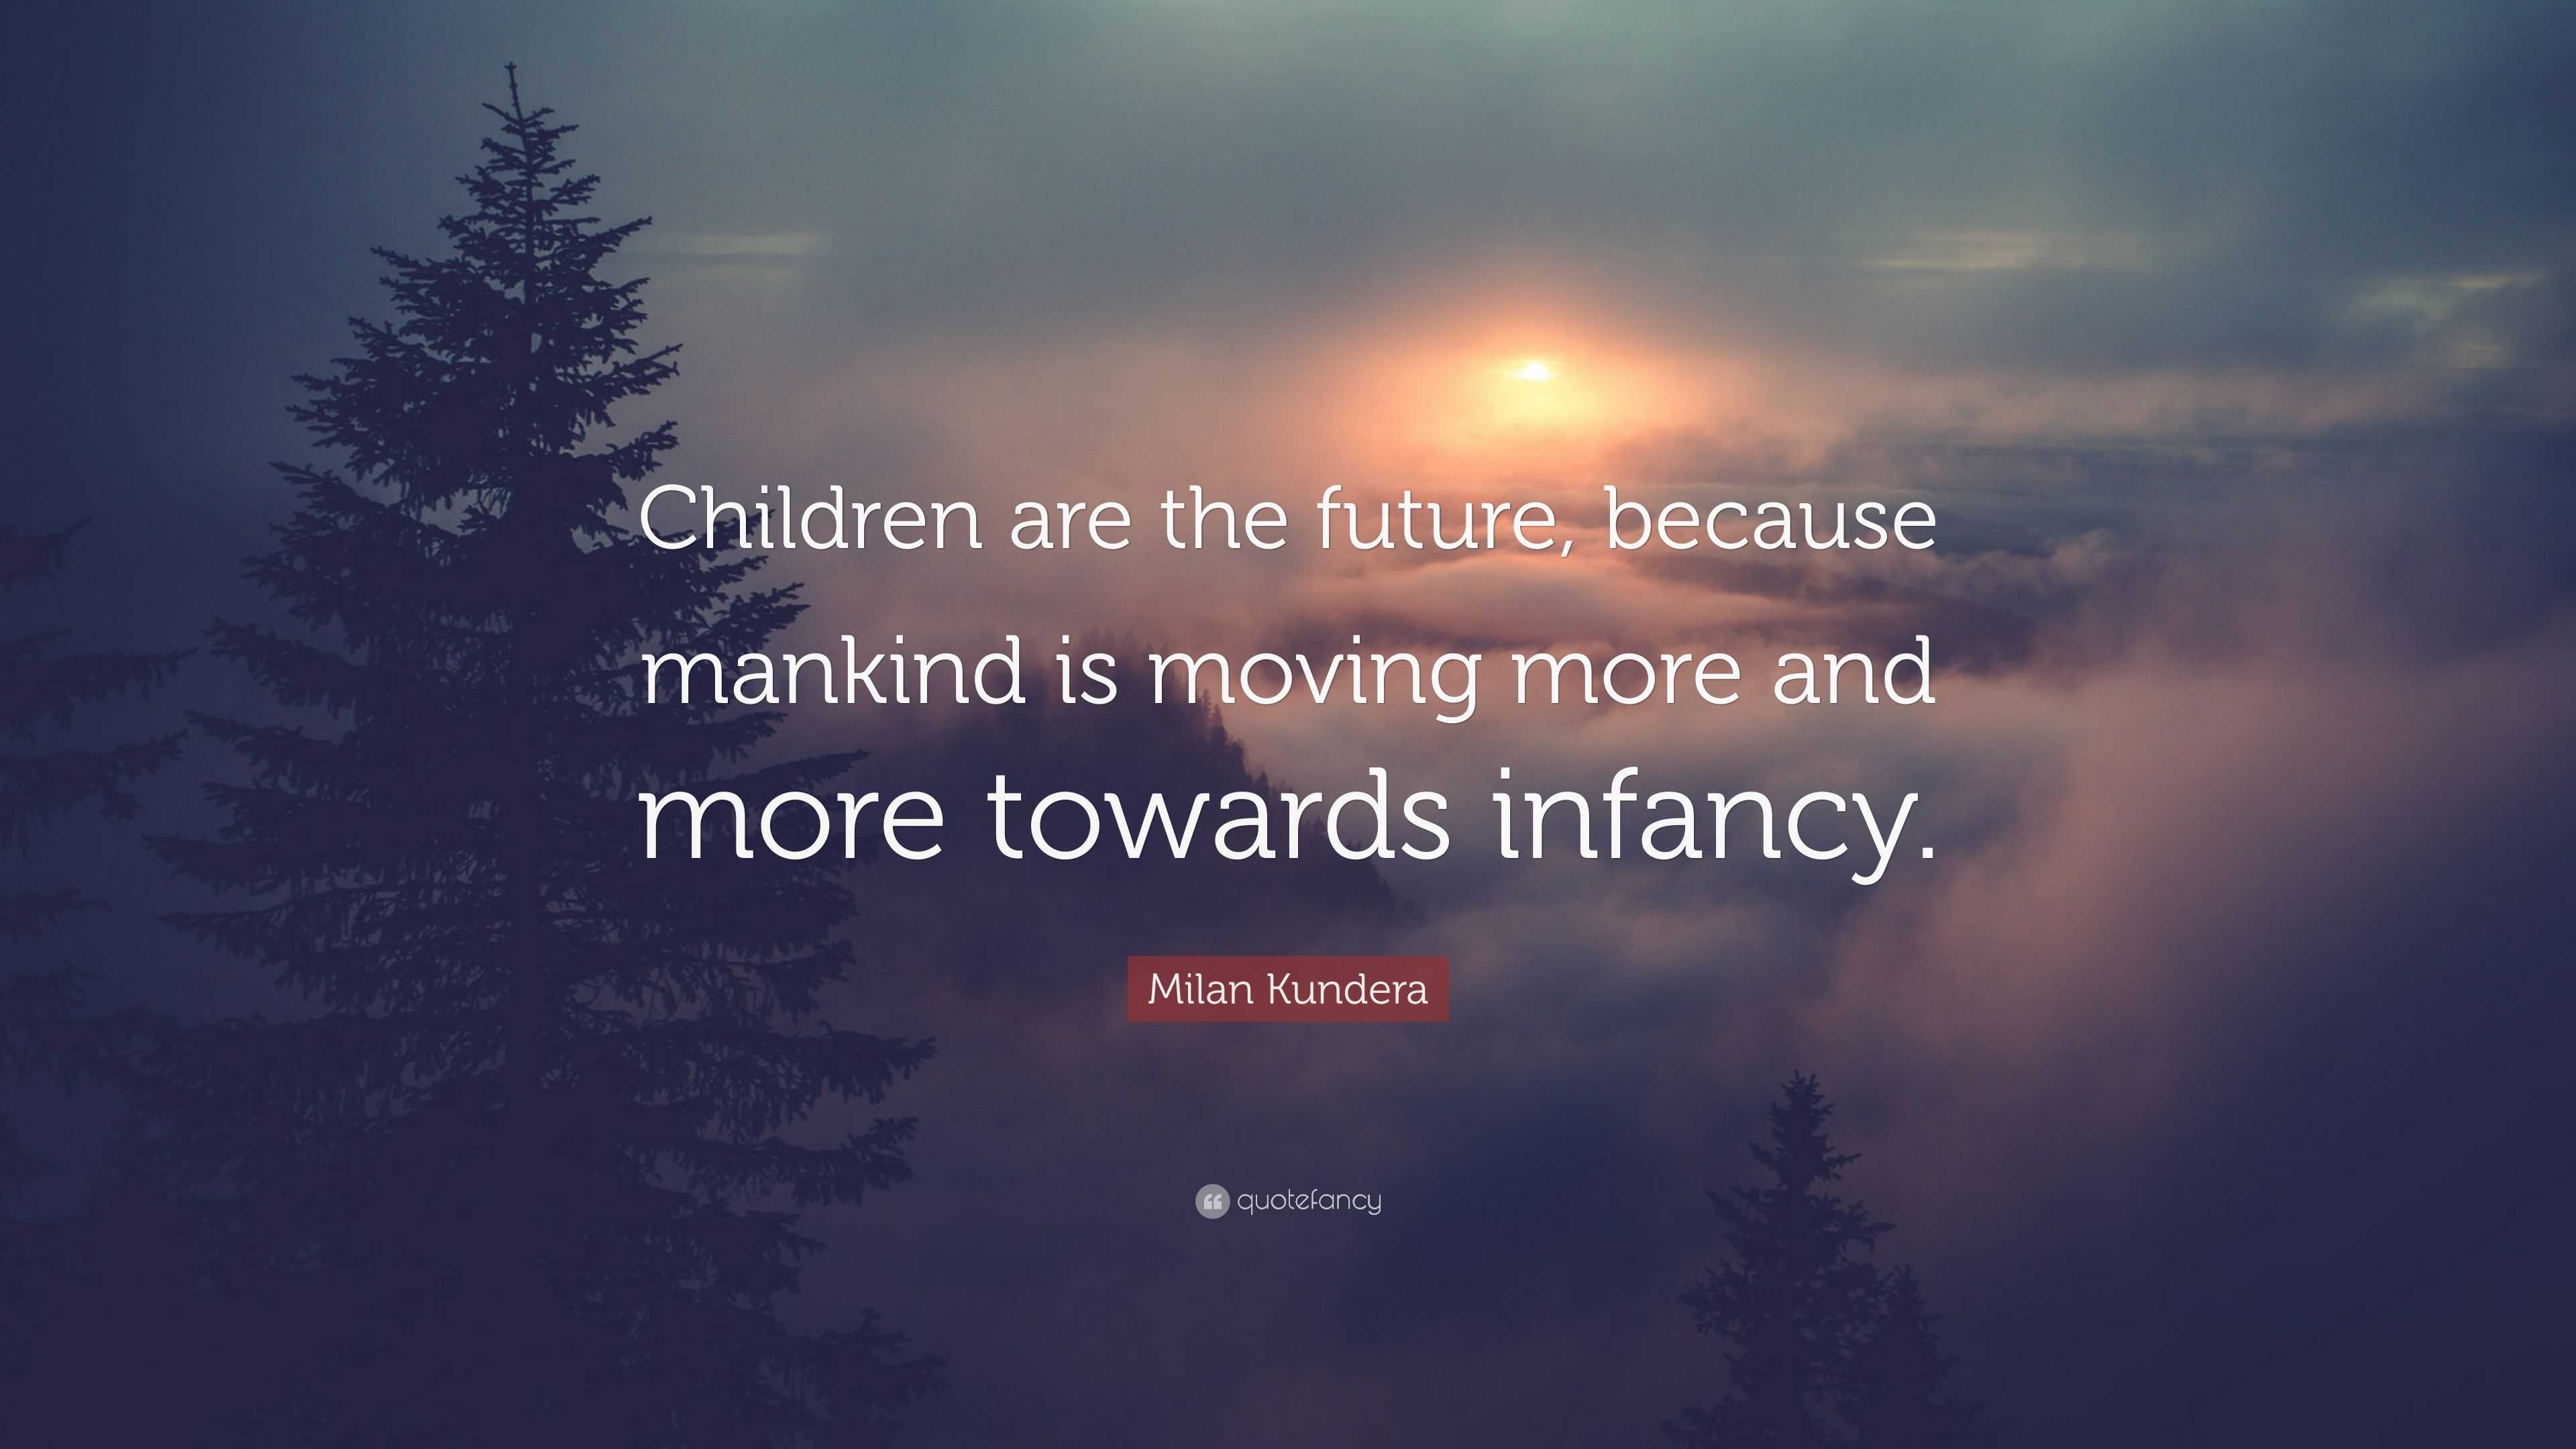 Milan Kundera Quote: “Children are the future, because mankind is ...